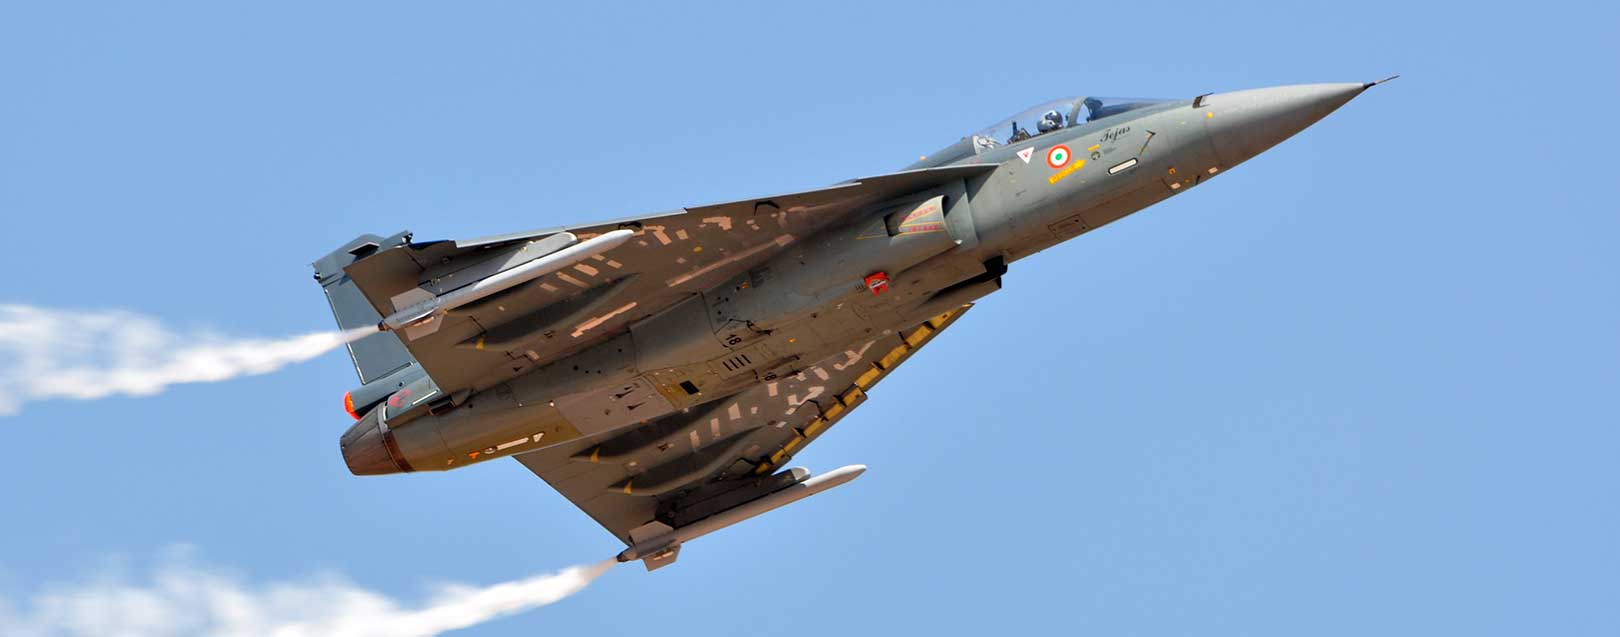 Plans to export LCA Tejas to other countries: MoD